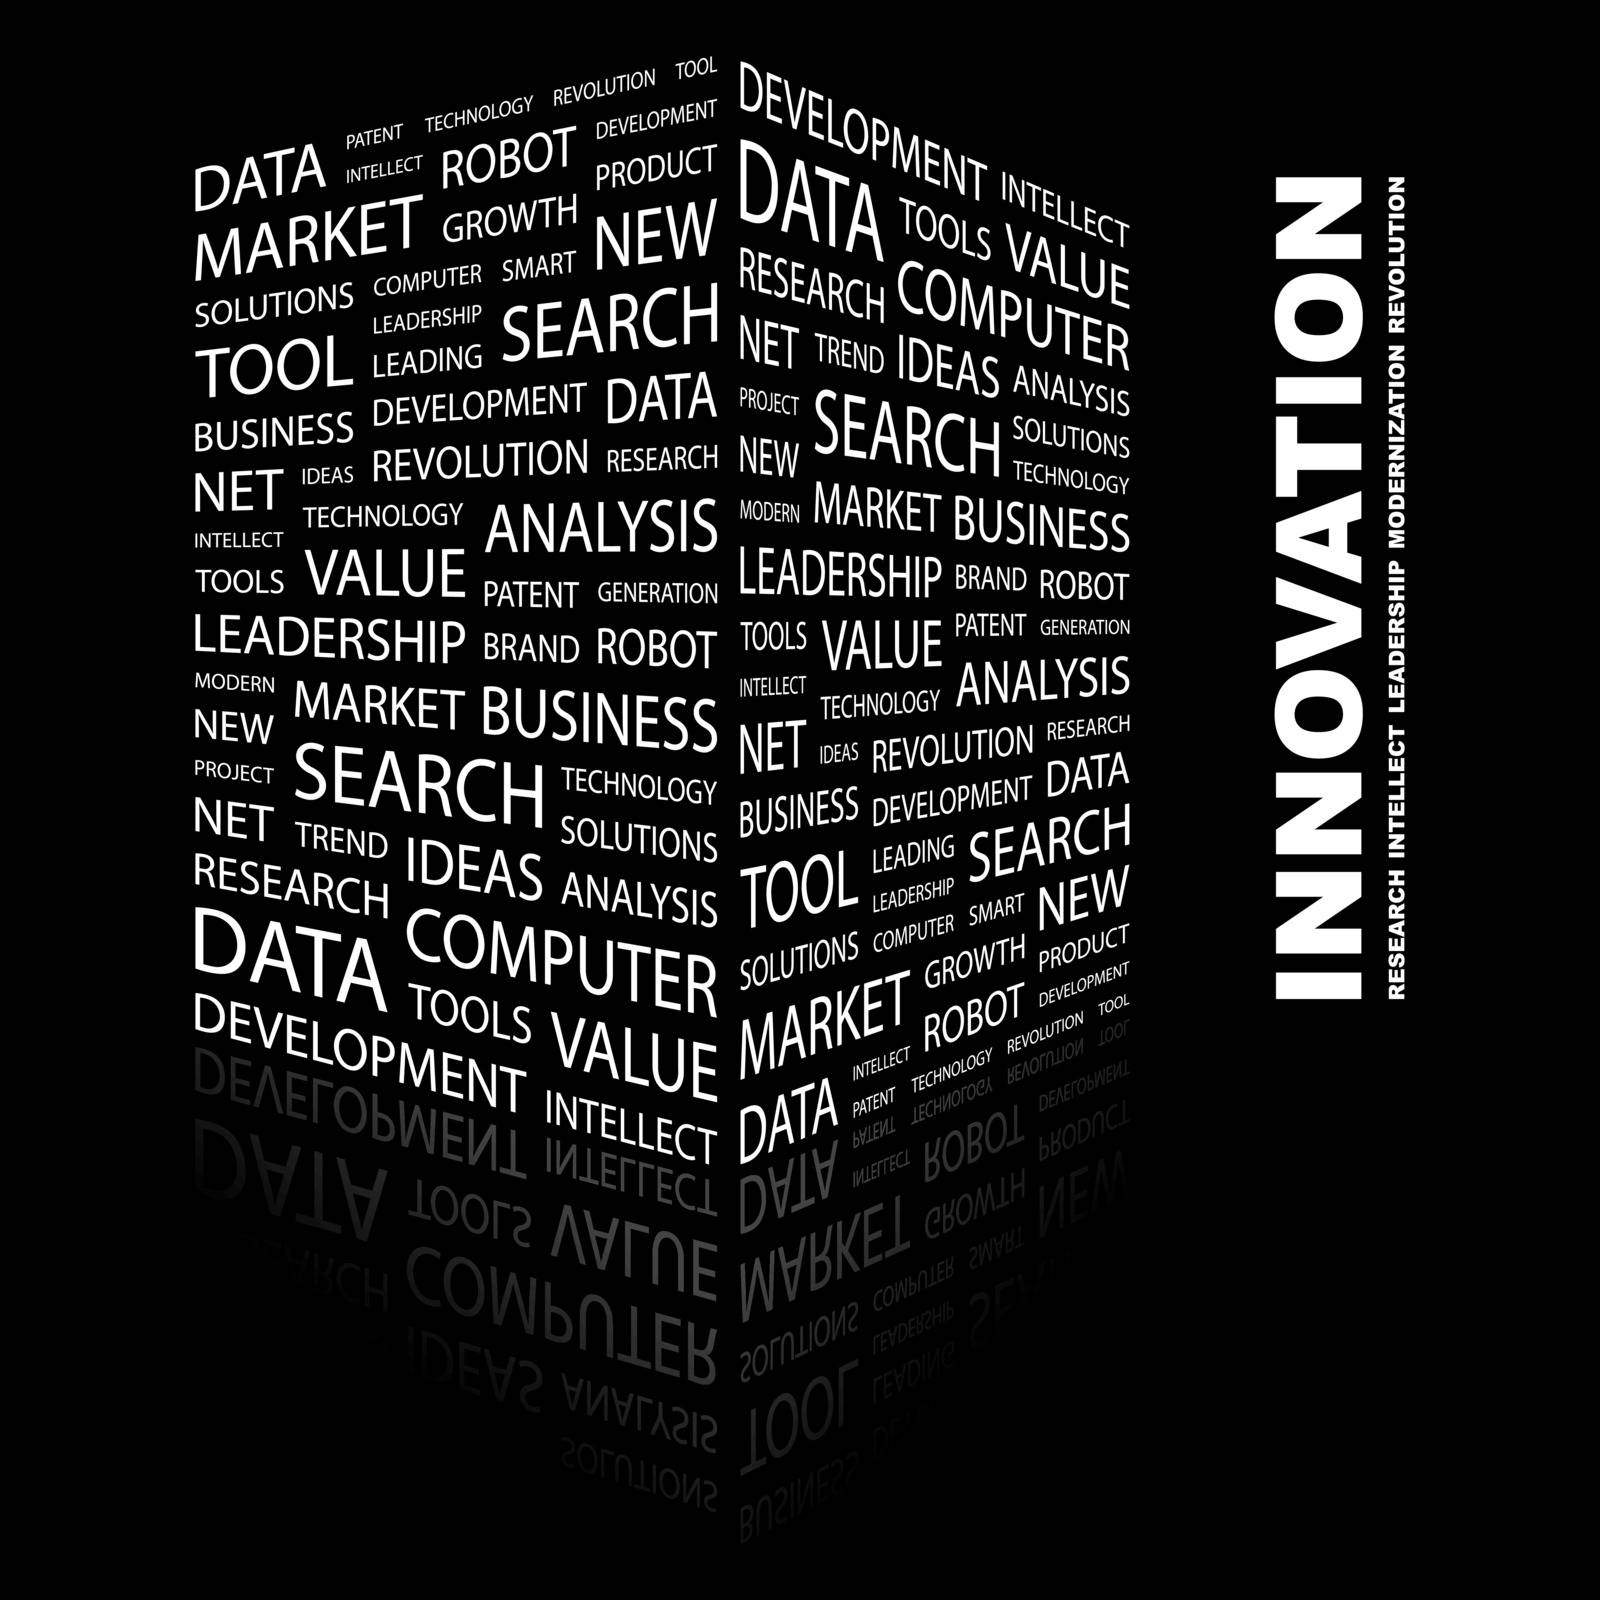 INNOVATION. Word cloud illustration. Tag cloud concept collage.